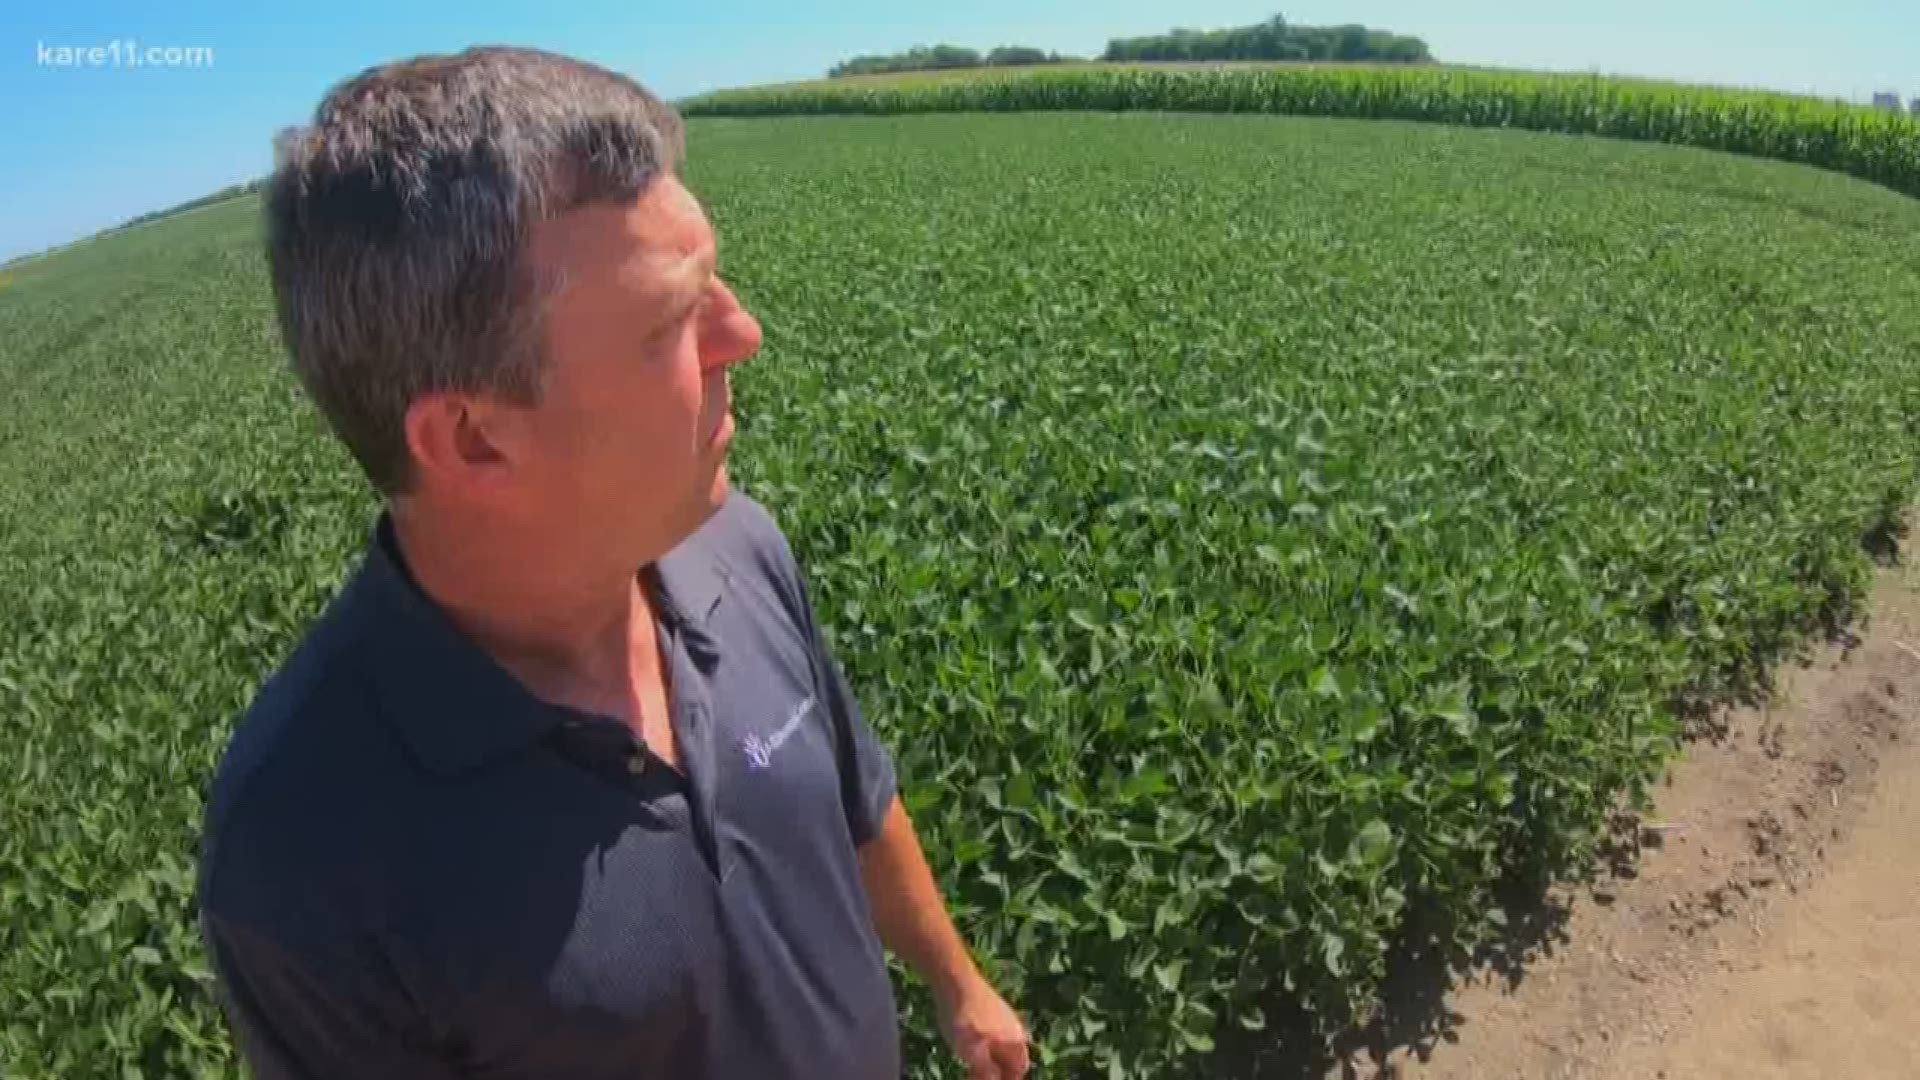 There's plenty of anxiety among Minnesota farmers these days due to a number of issues.